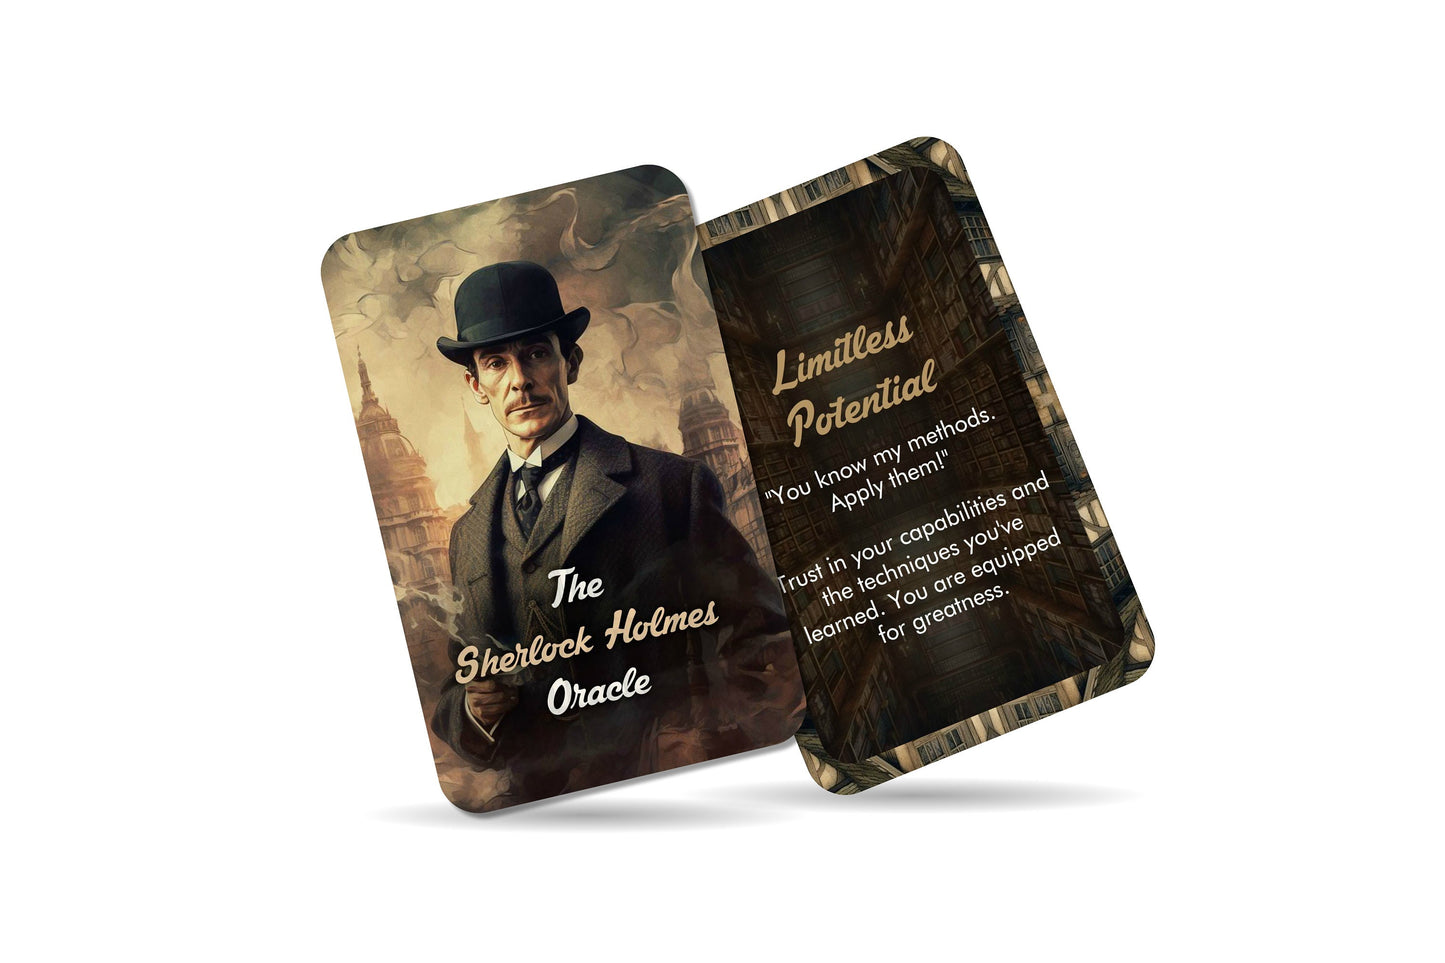 The Sherlock Holmes Oracle - Based on Arthur Conan Doyle masterpiece - Divination tools - Oracle cards